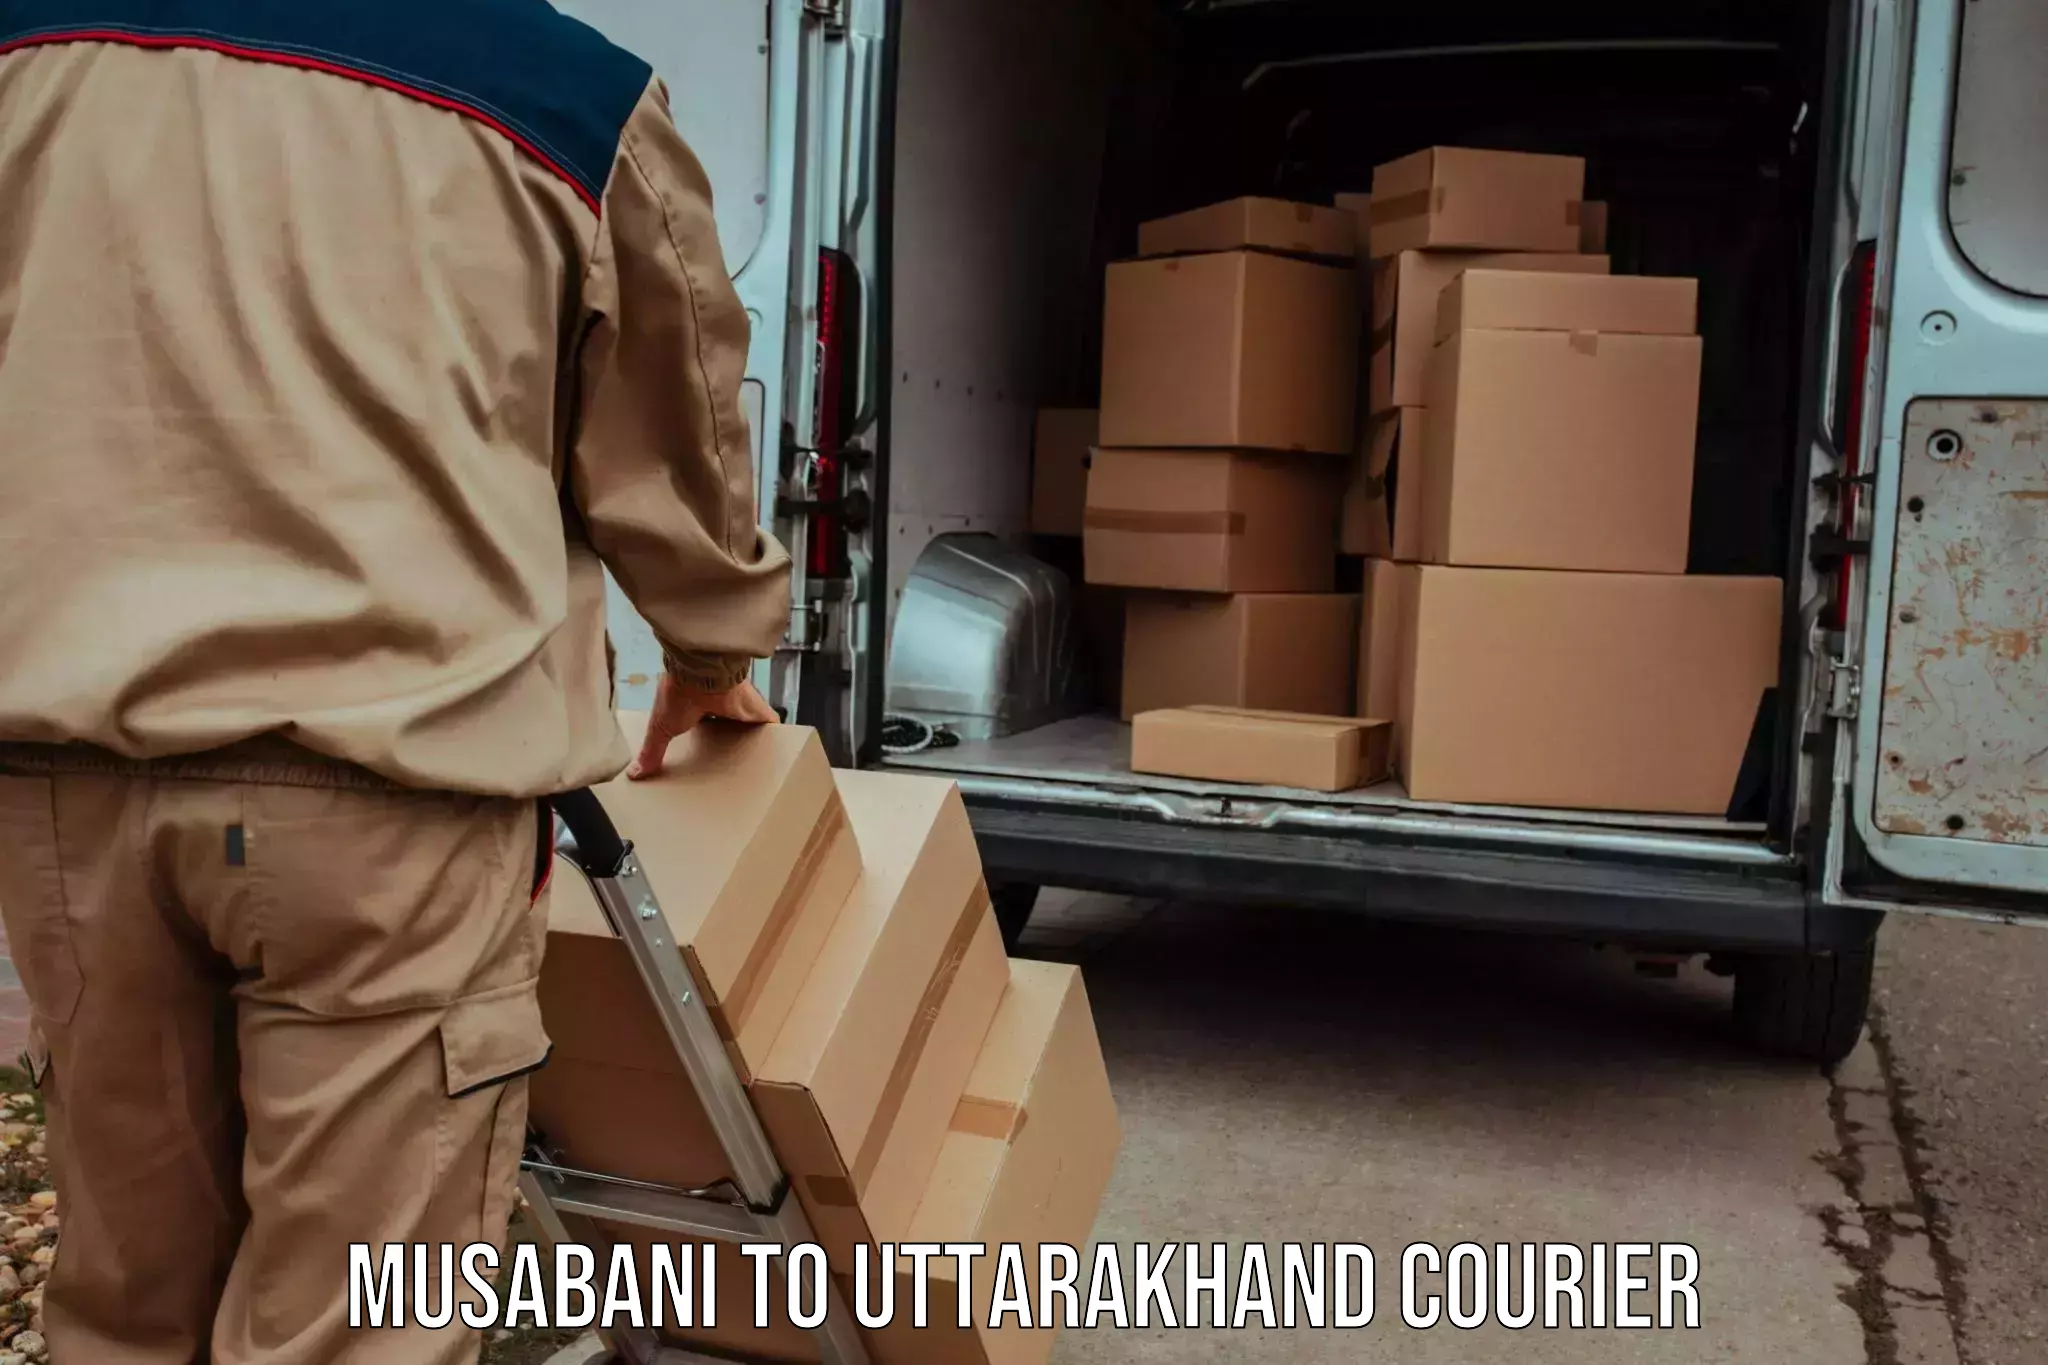 Next day courier in Musabani to Dwarahat